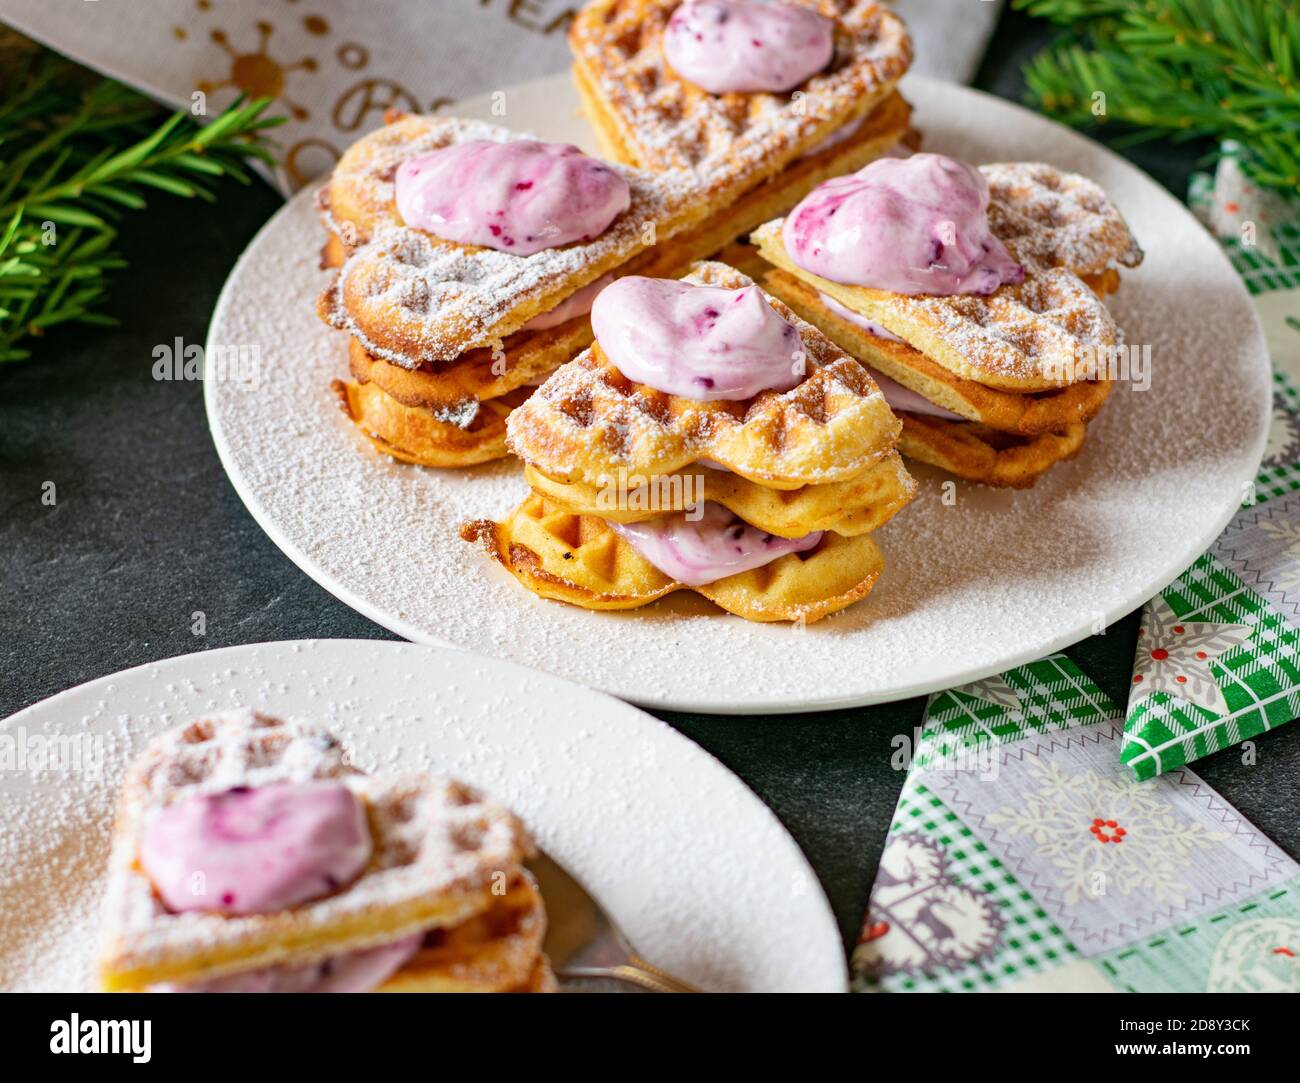 freshly baked waffles in a heart shape served on a plate during christmas with blueberry cream filling and topping Stock Photo